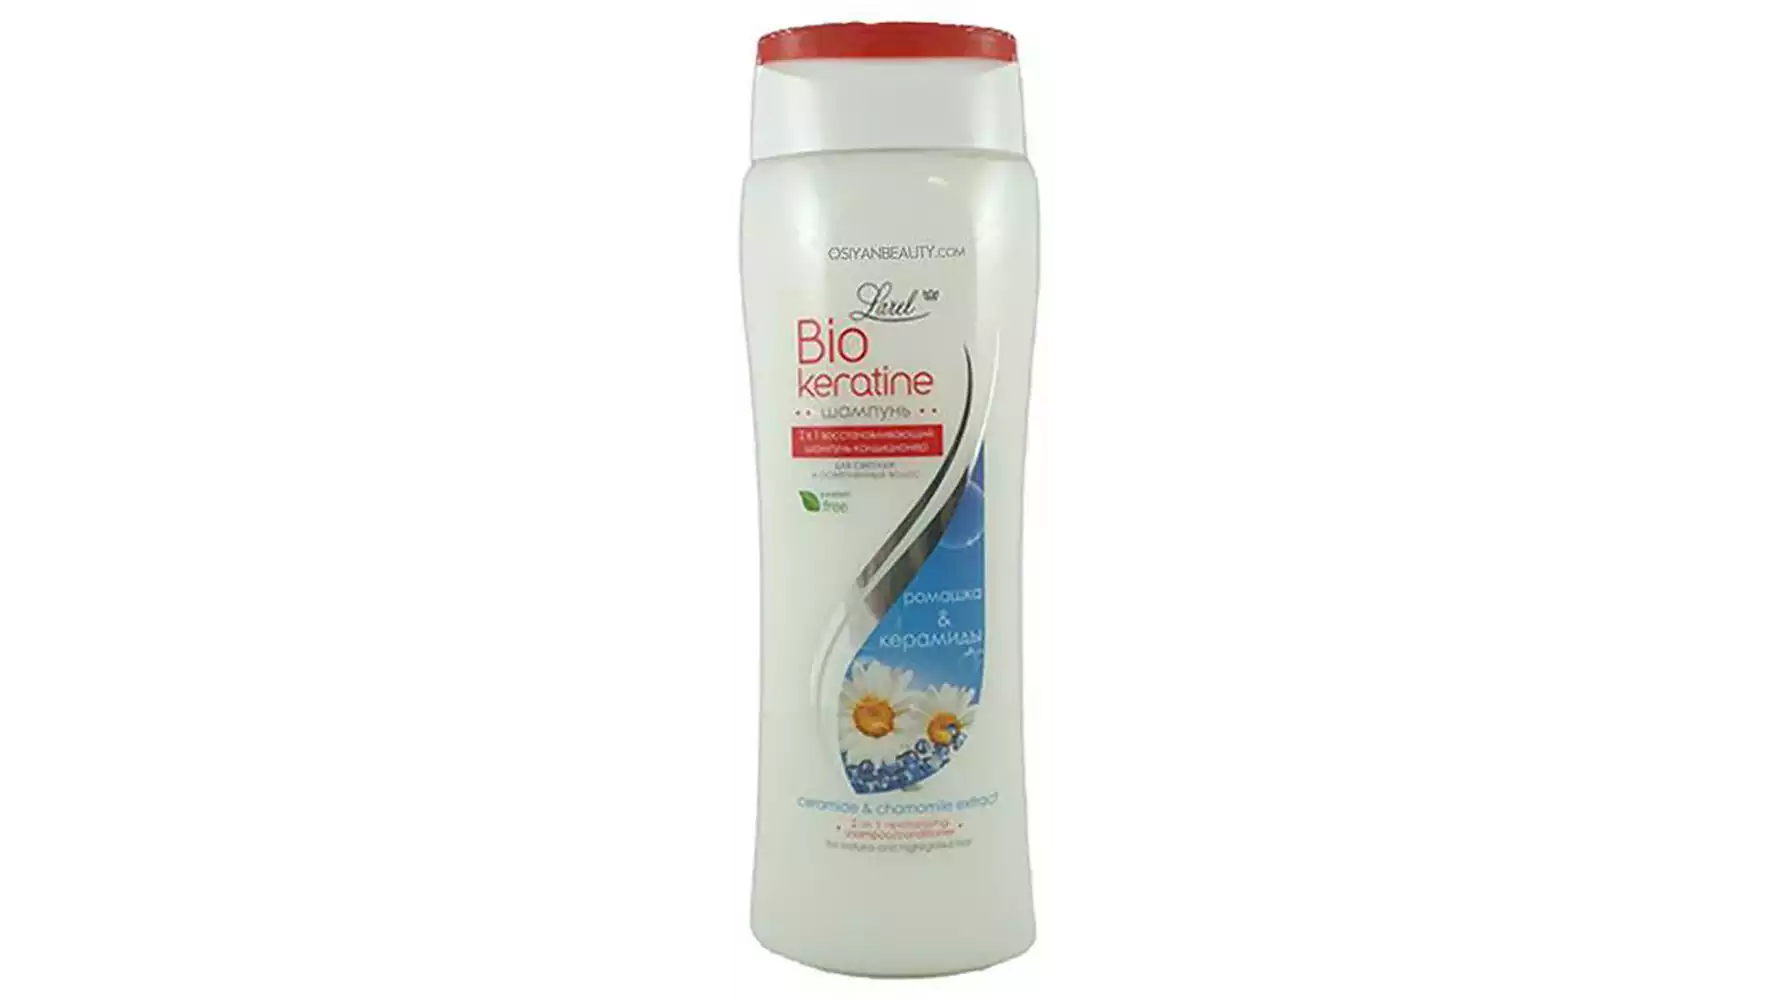 Larel Bio Keratine Shampoo+Conditioner 2In1With Ceramide And Chamomile Extract Hair(Made In Europe) (400ml)